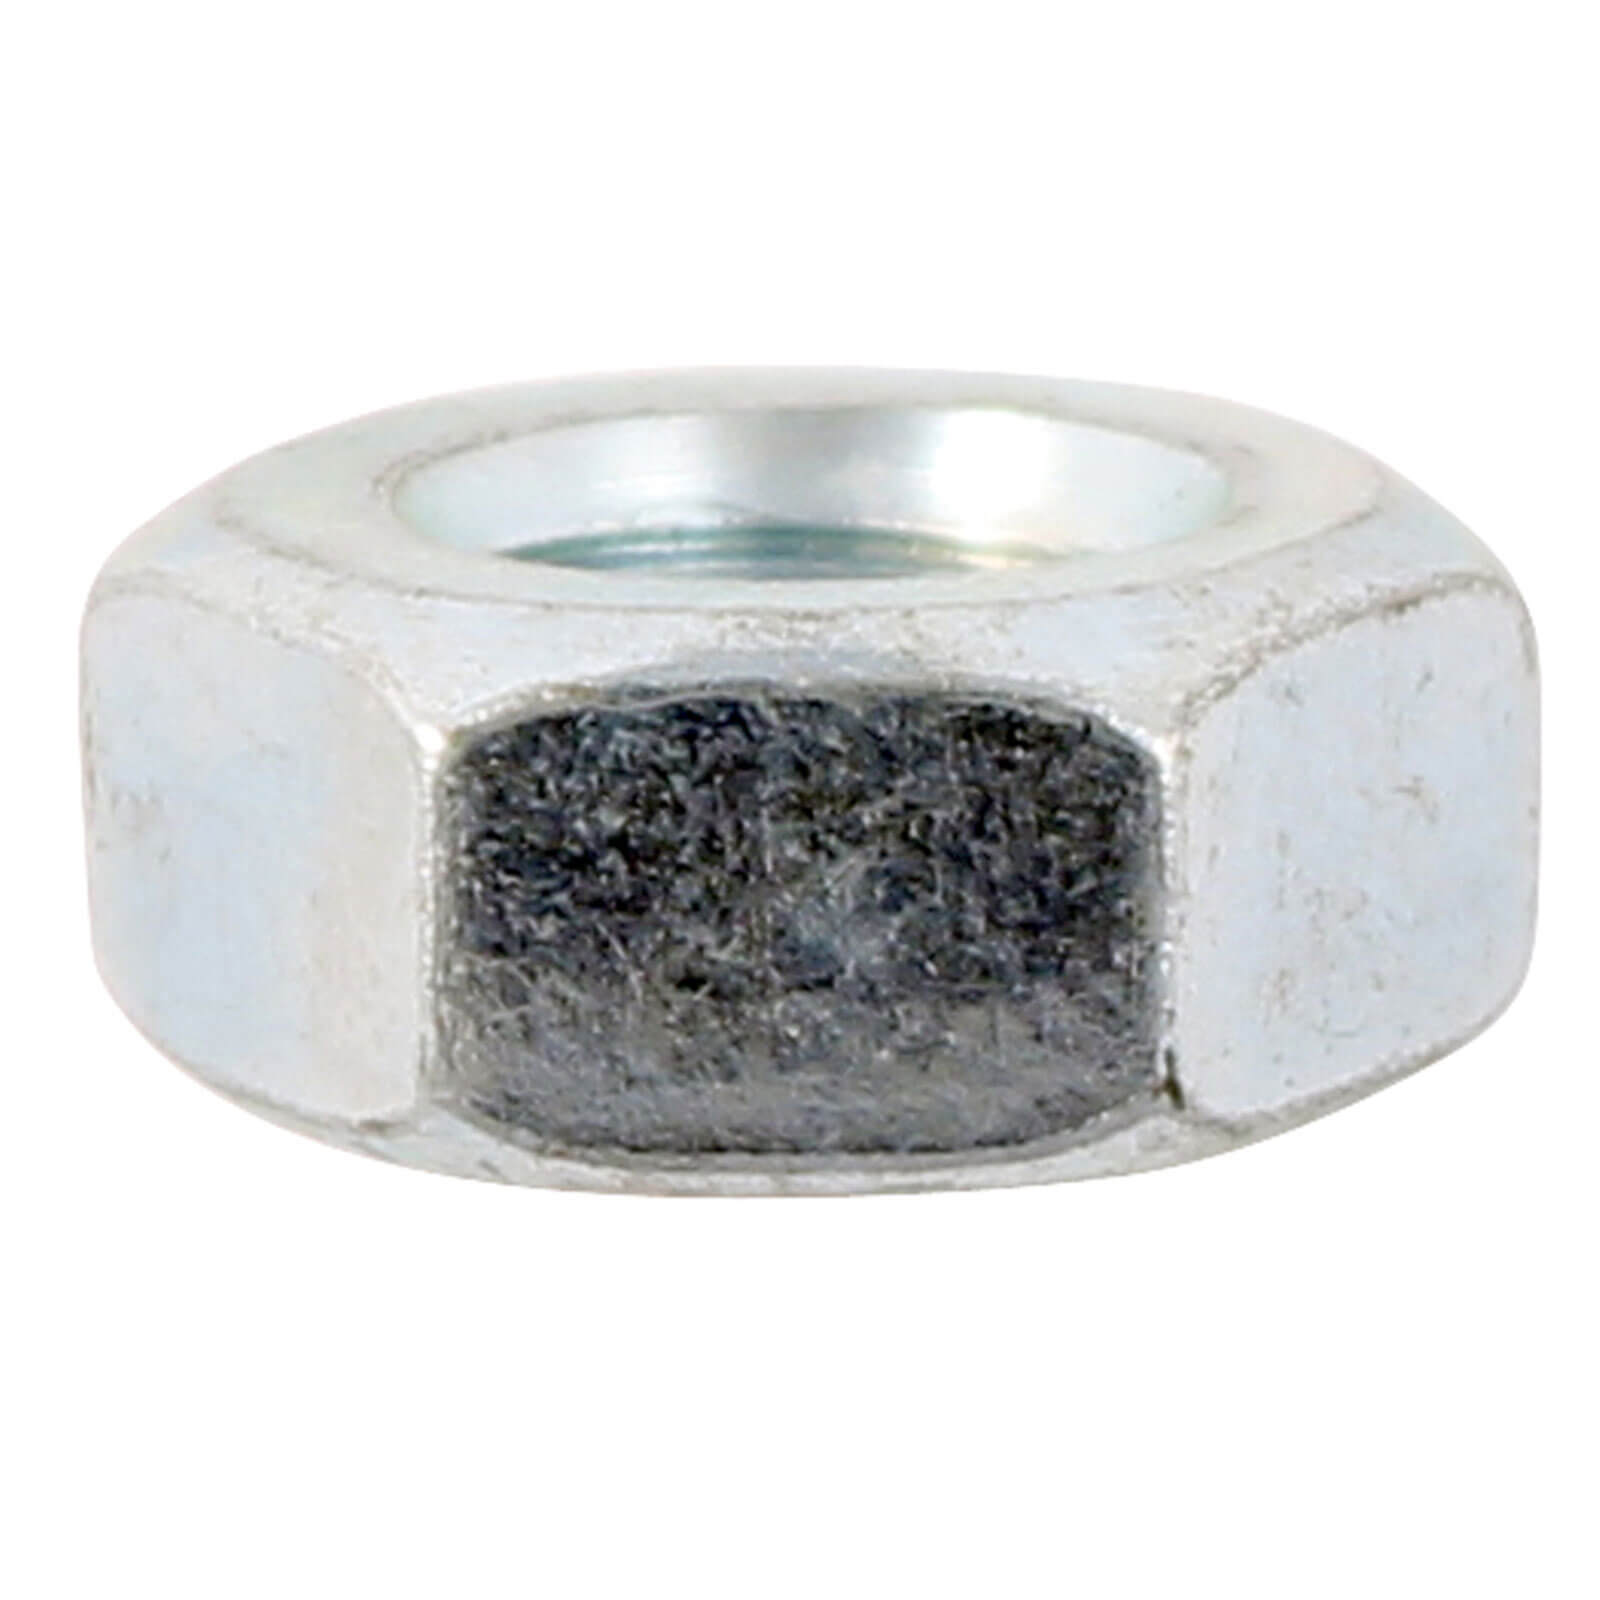 Image of Sirius A2 304 Hex Full Nut Stainless Steel M18